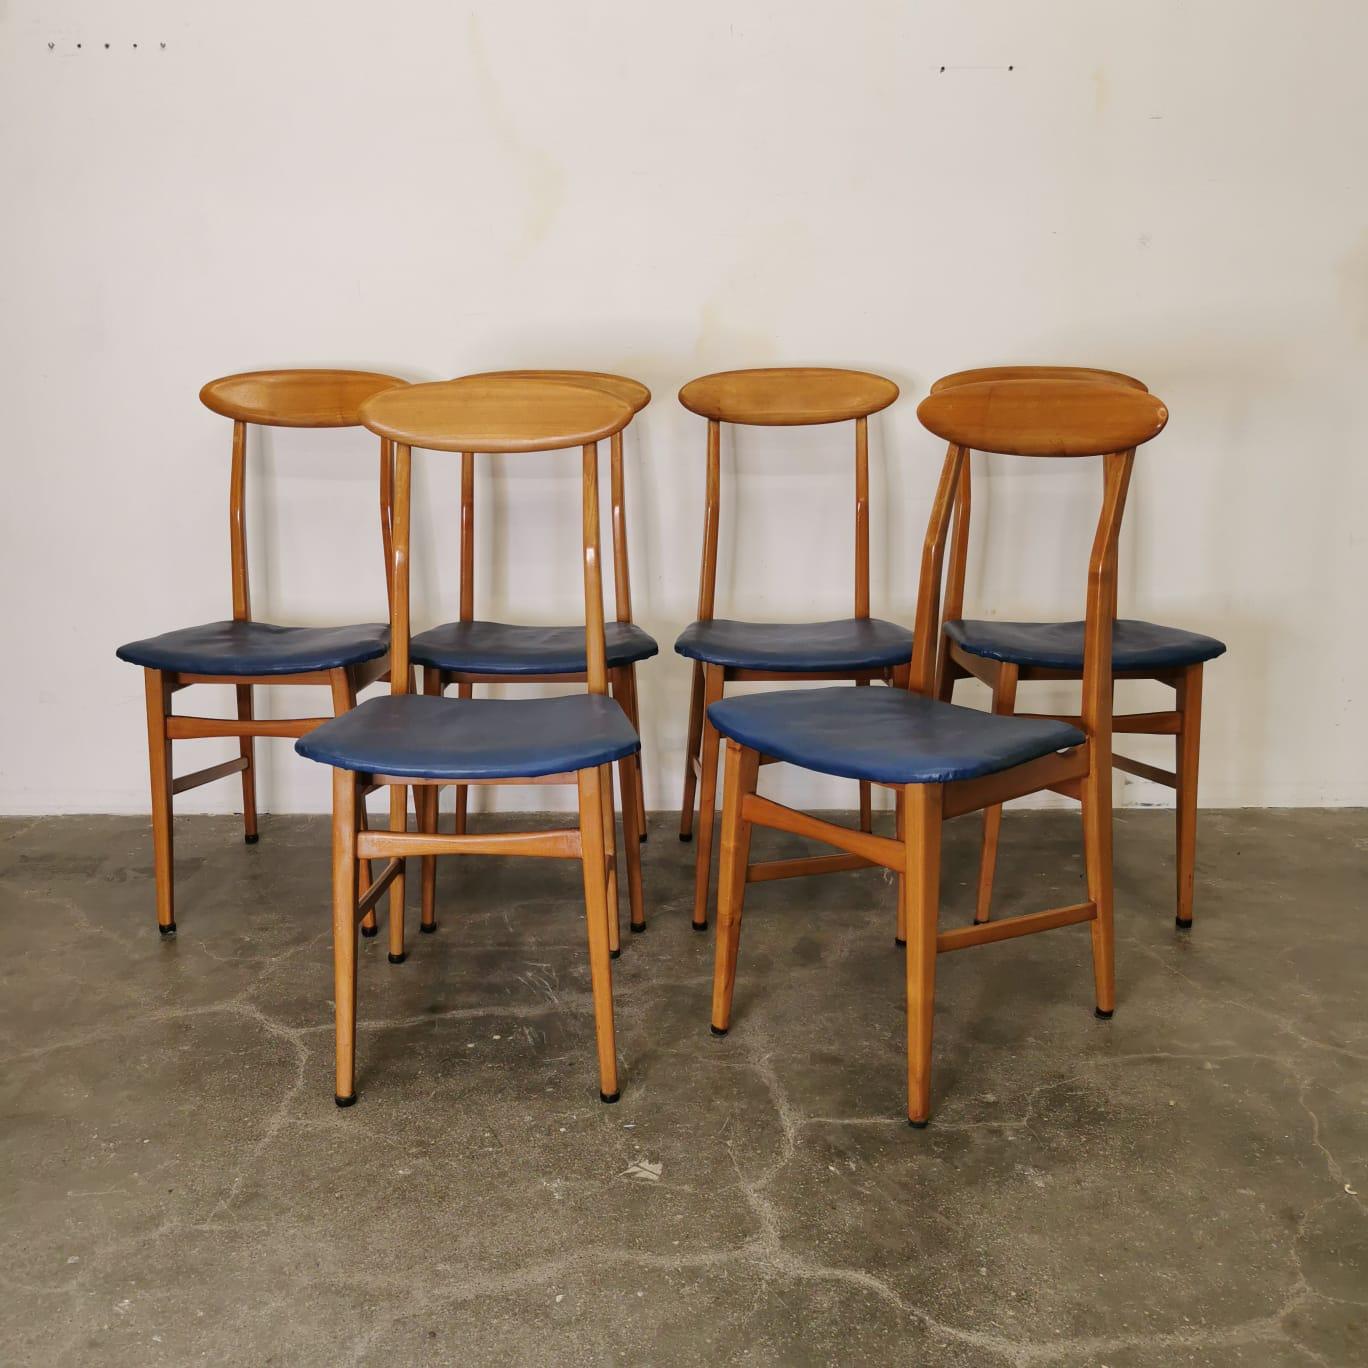 The set of six midcentury chairs by Sorgente del Mobile is a captivating ensemble that beautifully embodies the essence of the era. Crafted with meticulous attention to detail, these chairs showcase the perfect balance between form and